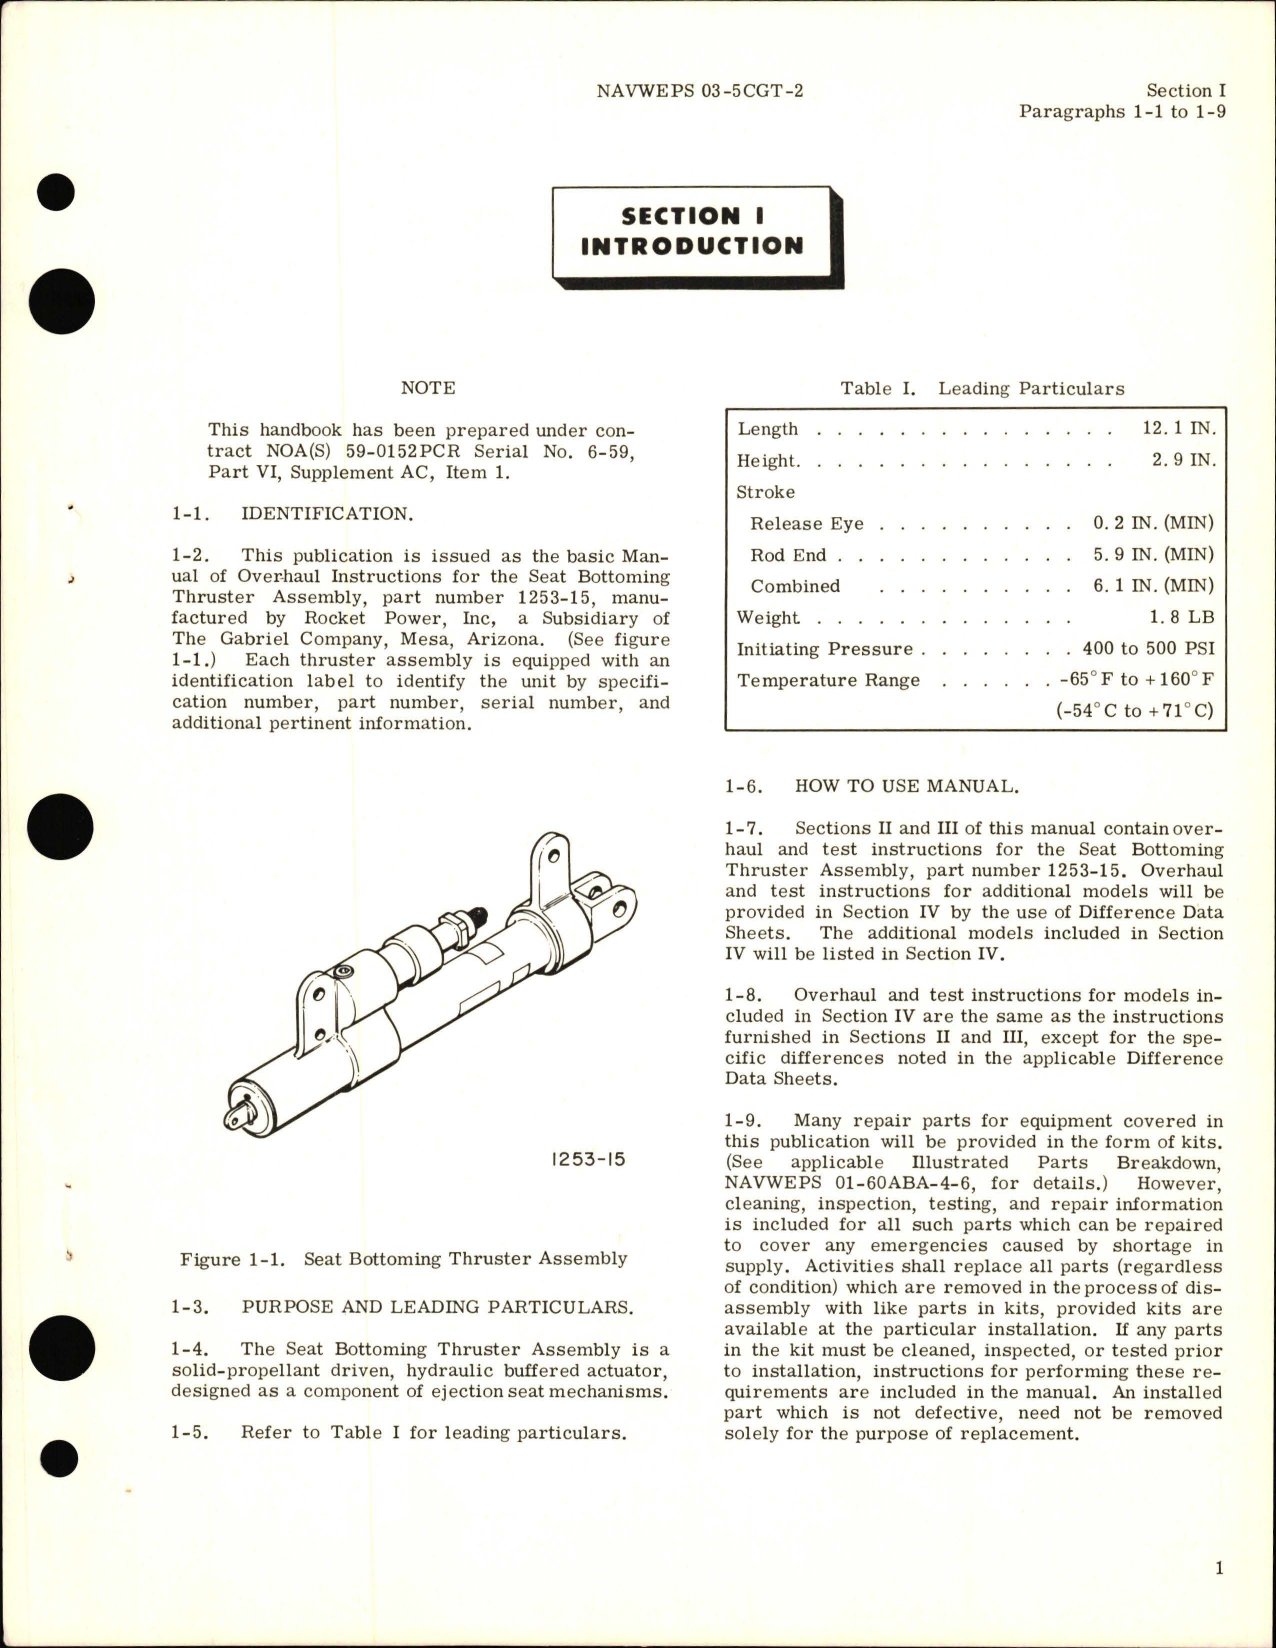 Sample page 5 from AirCorps Library document: Overhaul Instructions for Seat Bottoming Thruster Assembly - Part 1253-14C and 1253-15 